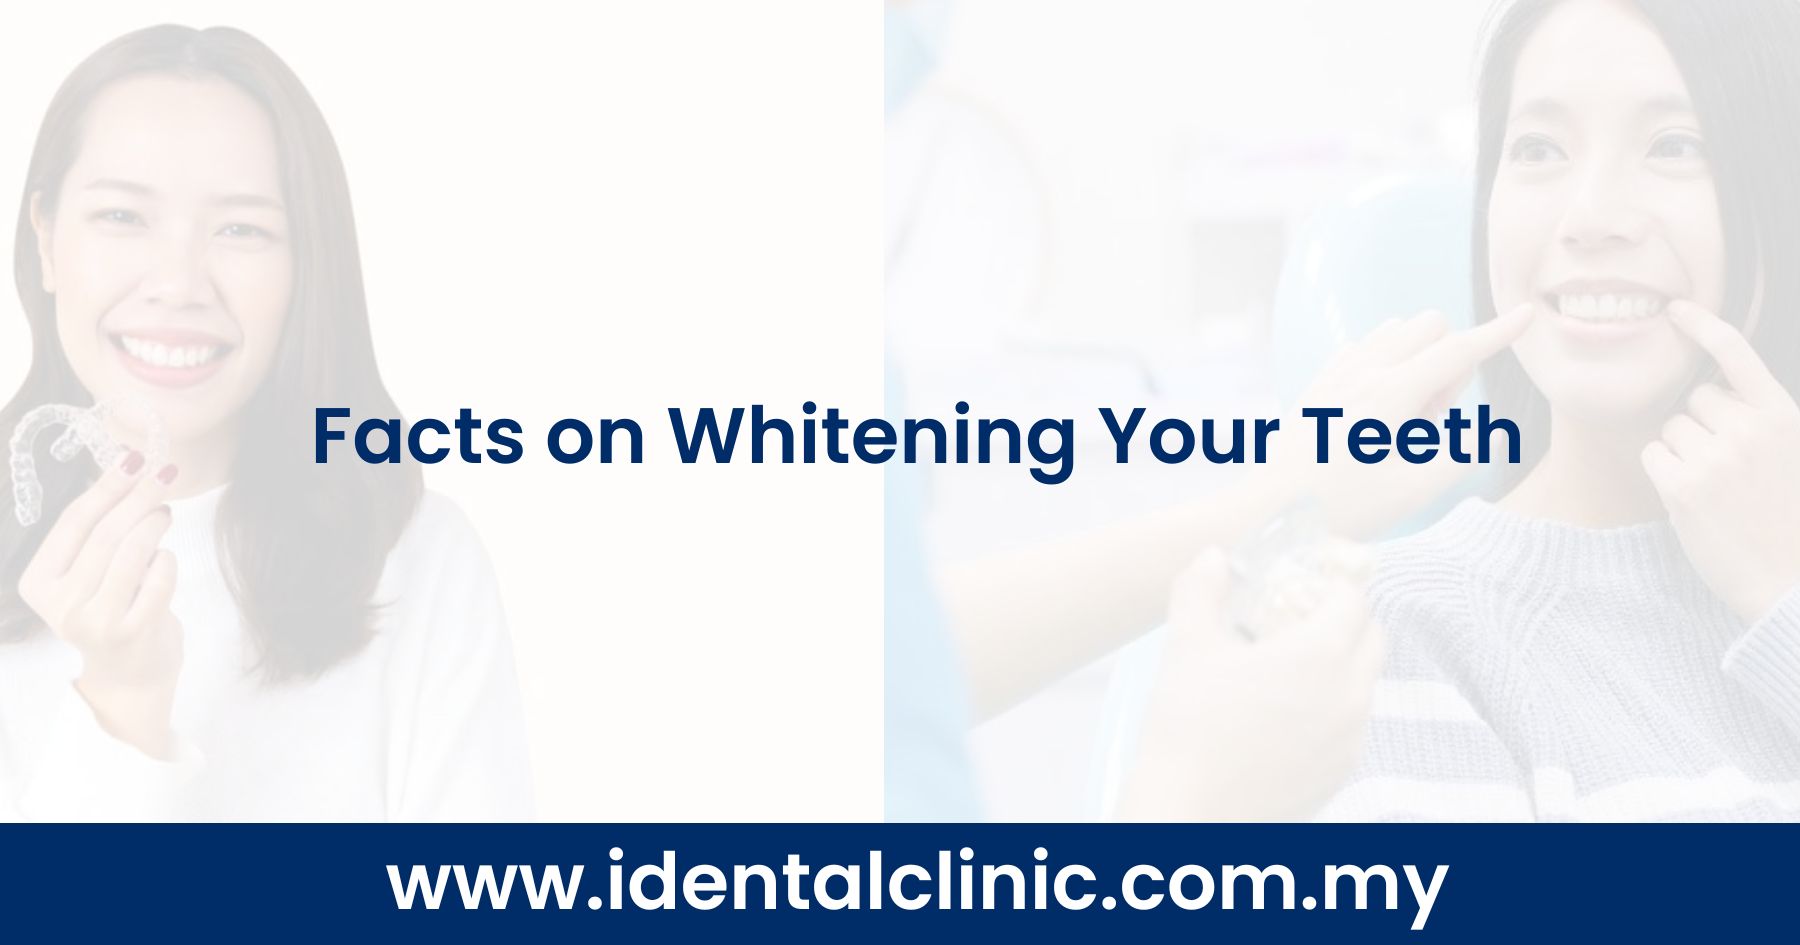 Facts on Whitening Your Teeth